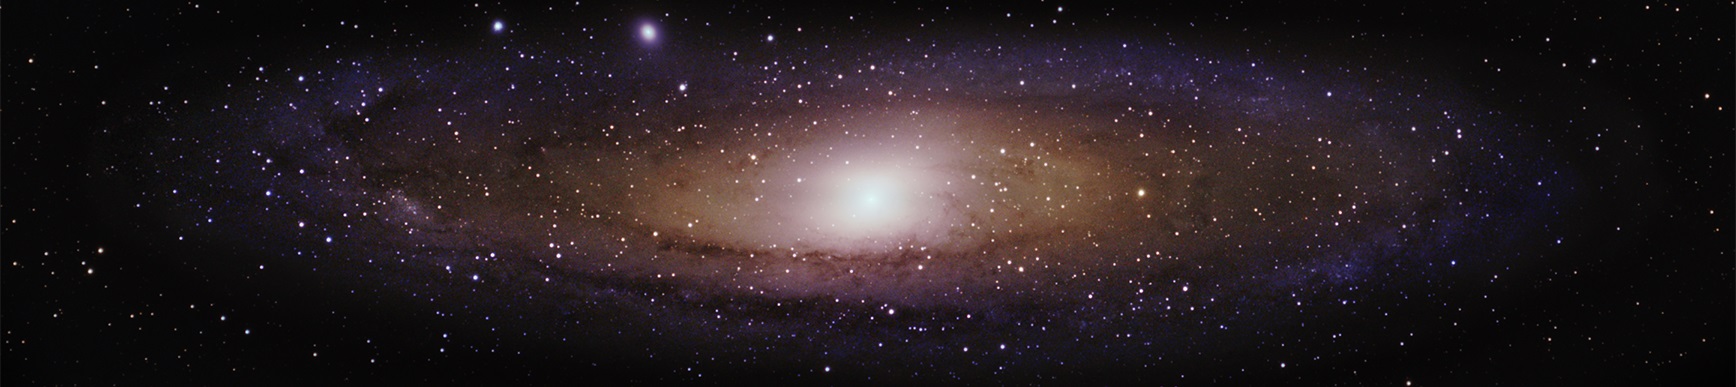 andromeda galaxy by Pete